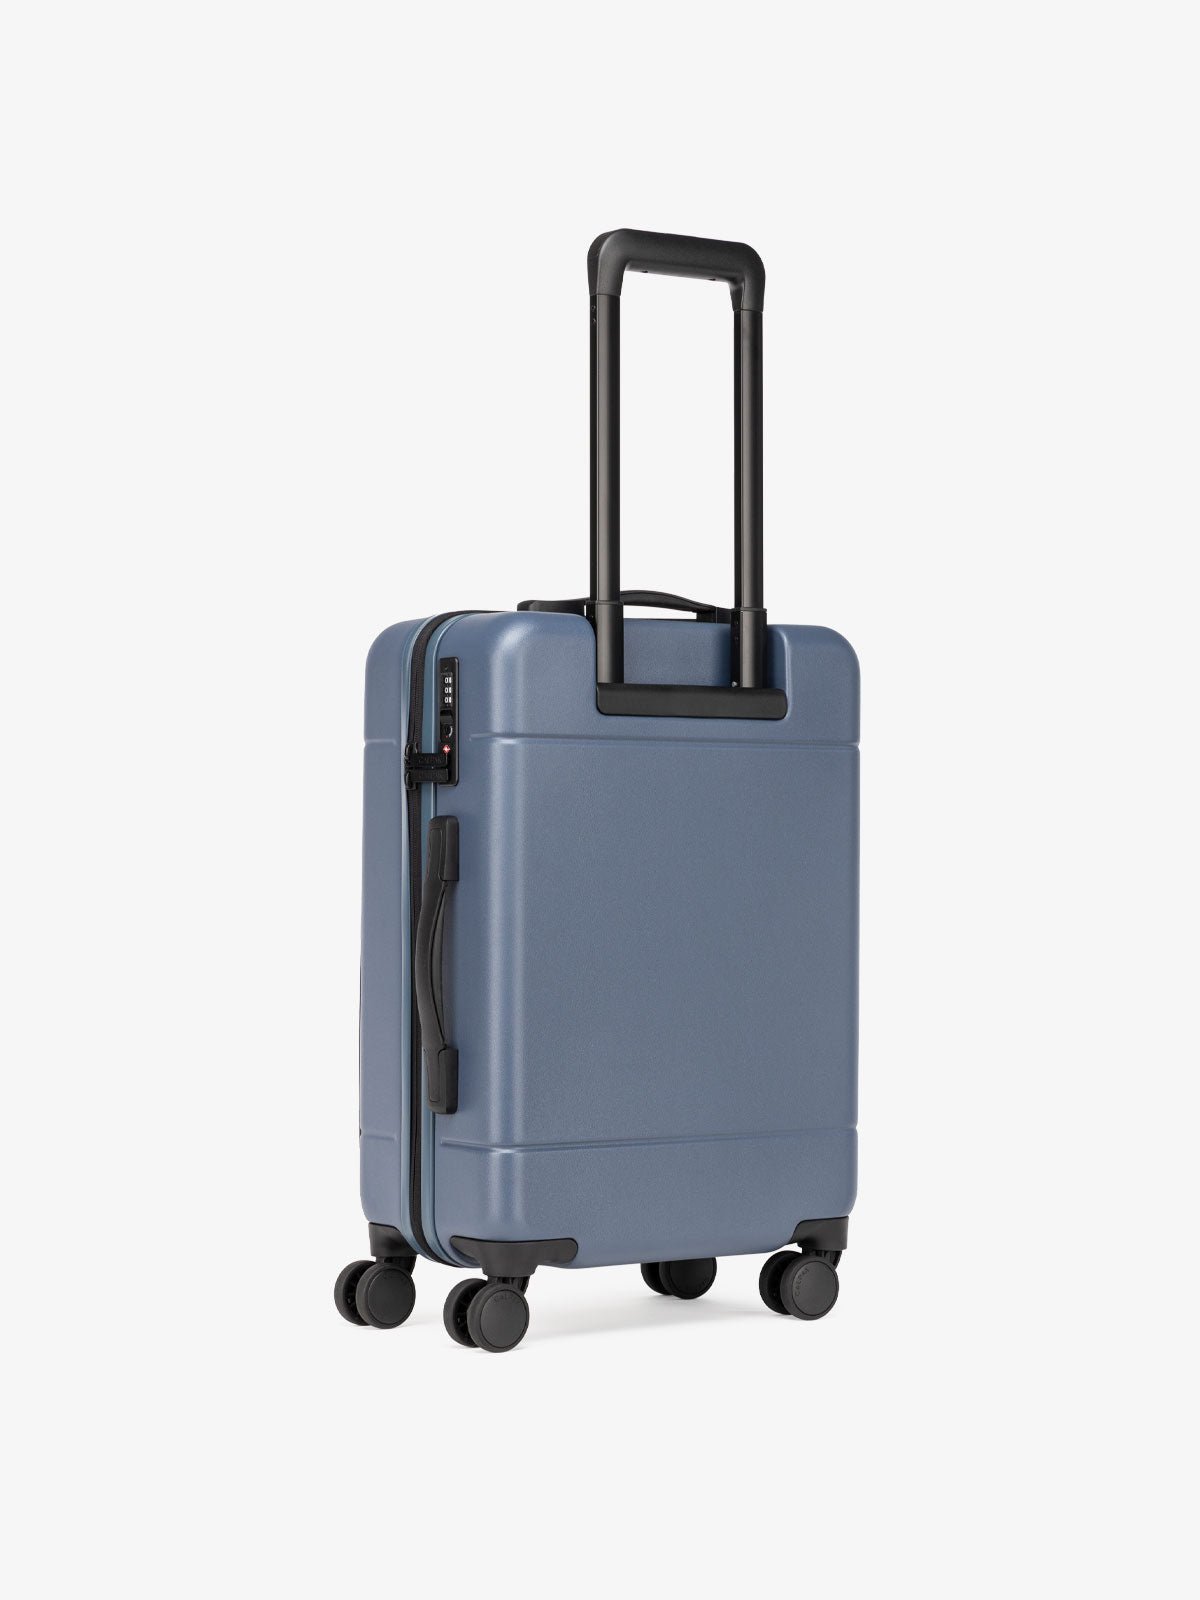 CALPAK Hue lightweight polycarbonate carry-on suitcase with laptop pocket in blue atlantic